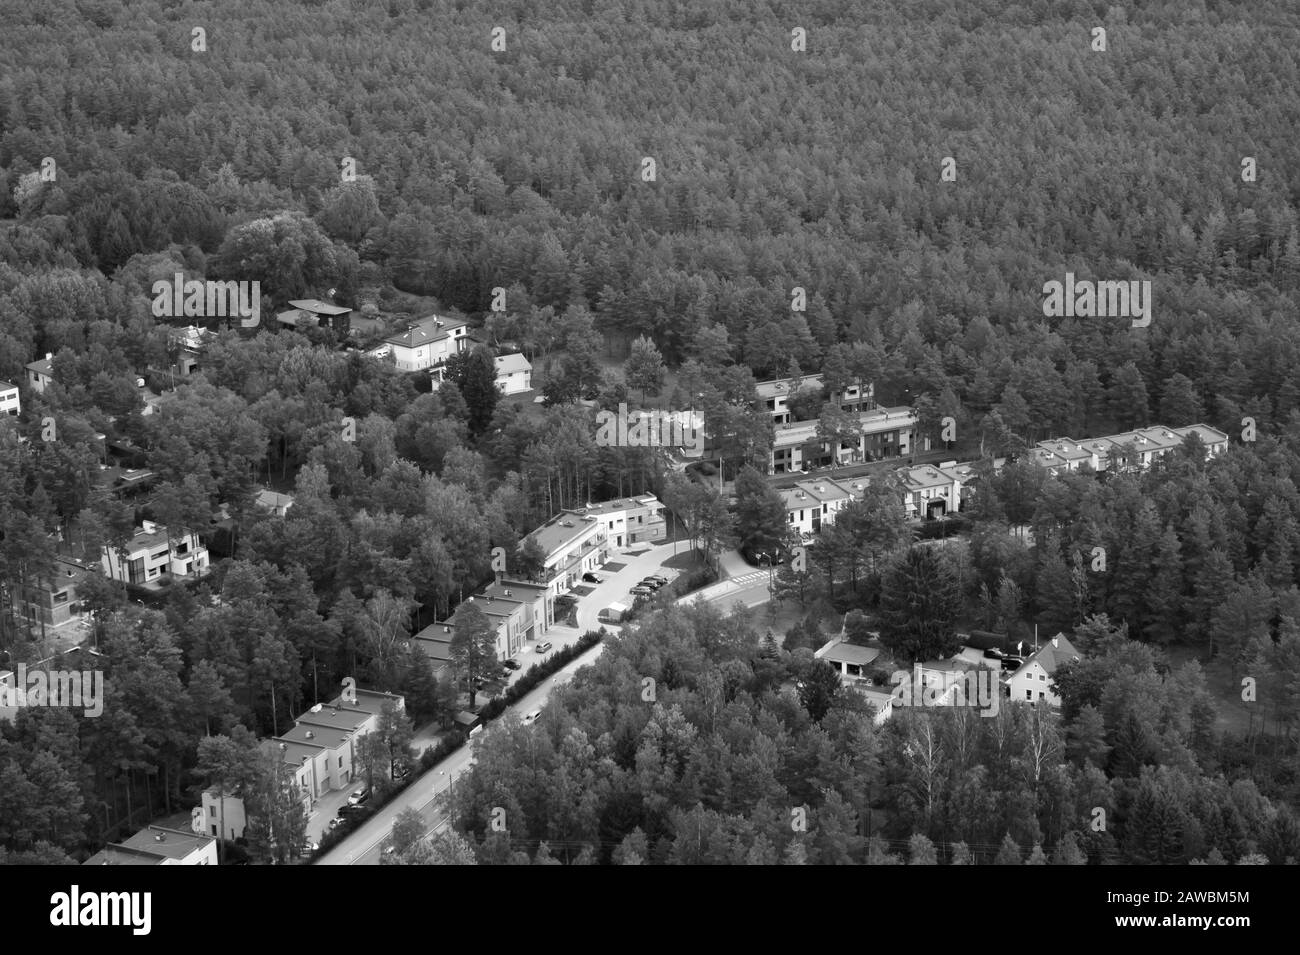 Aerial view over houses and forests in Tallinn Estonia. panoramic landscape black and white Stock Photo